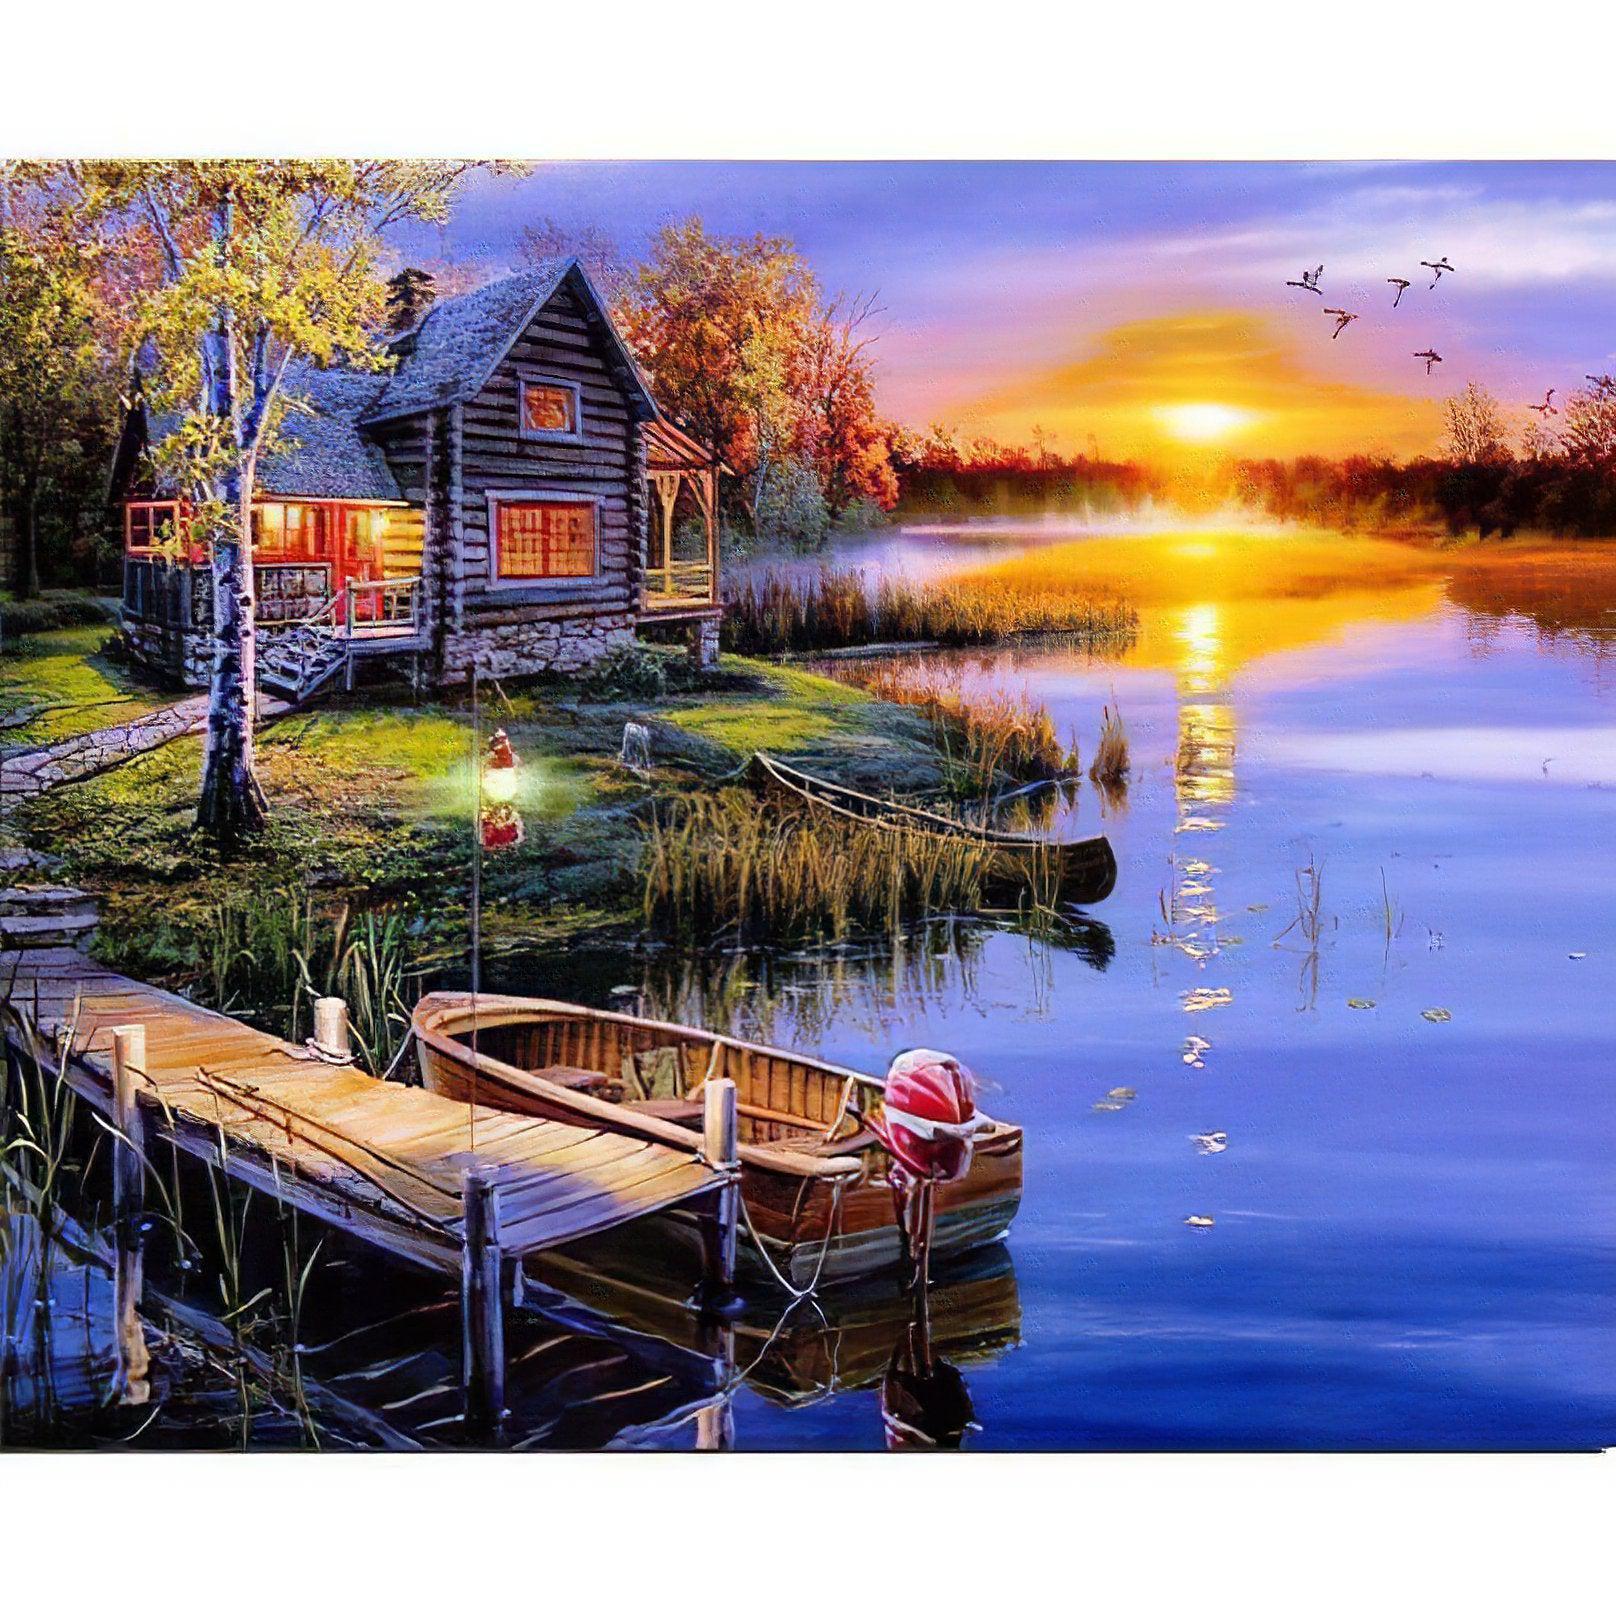 Unwind with the tranquil House by the Lake at dusk.House By The Lake At Dusk - Diamondartlove